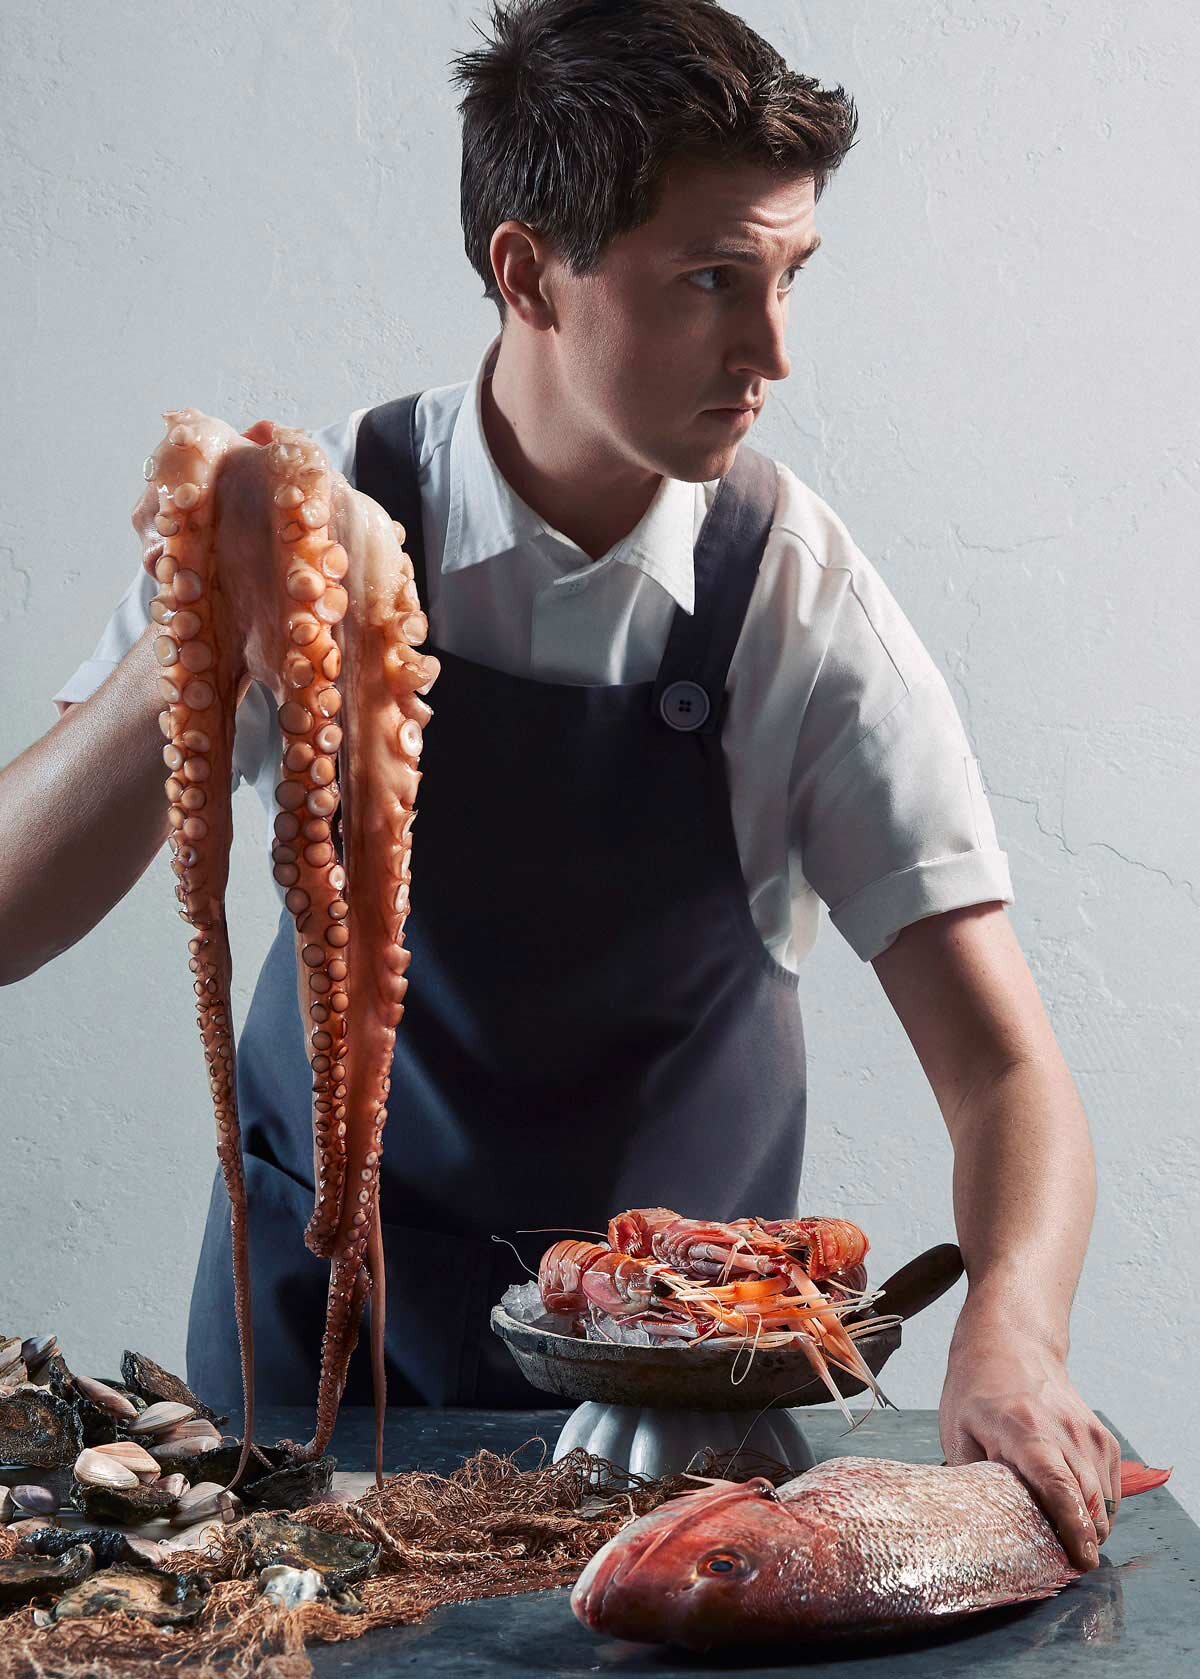  A moody portrait of Josh Niland - The talented figure behind Saint Peter and Fish Butchery holds a trailing octopus up in one hand, in front of a spead of seafood. Captured for the cover of Harvey Norman’s Gourmet Institute 2019. Art Directed by Ale